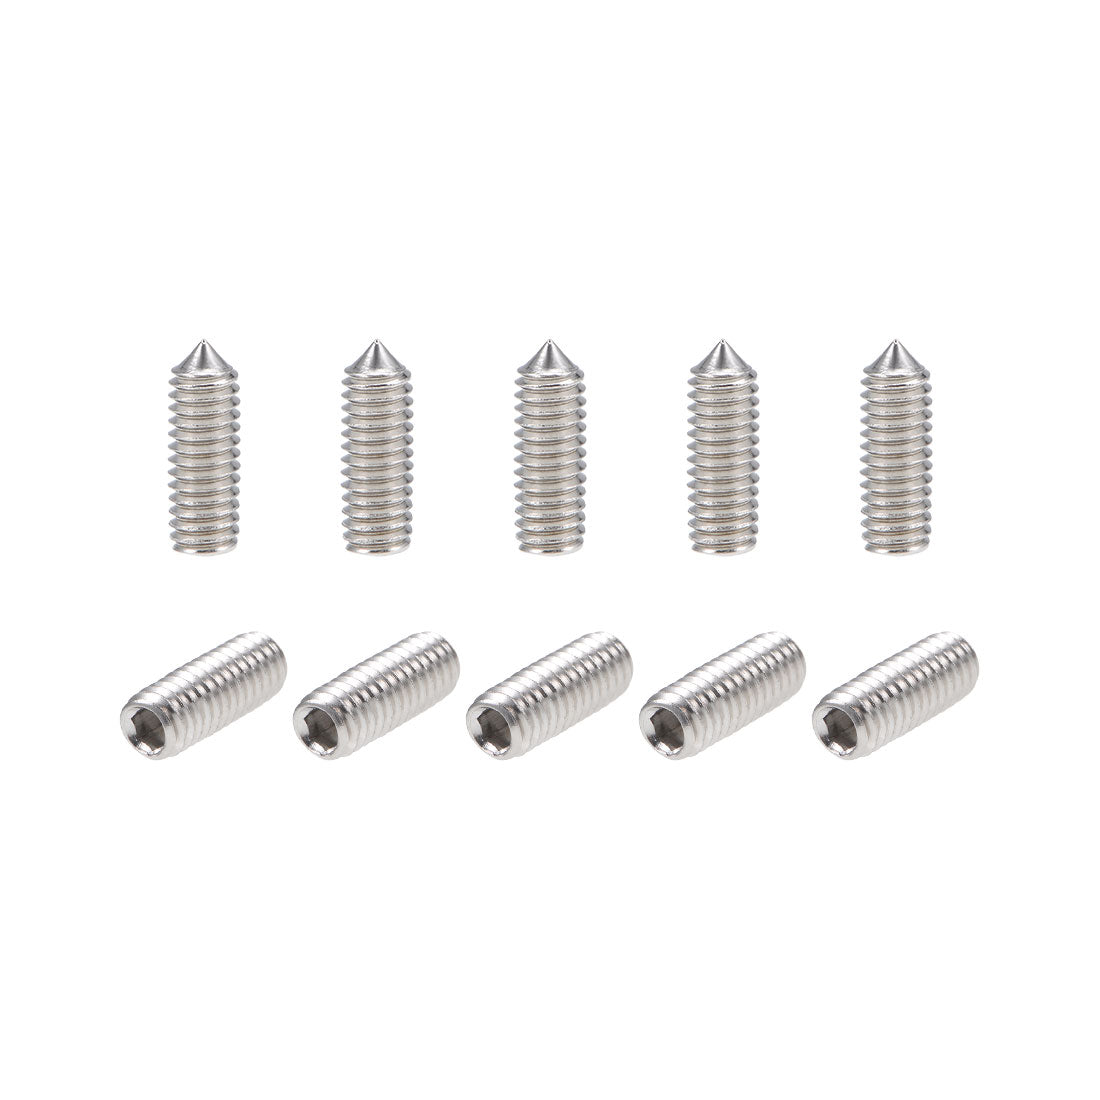 uxcell Uxcell Internal Hex Socket Set Grub Screws Cone Point 304 Stainless Steel Screw 50Pcs